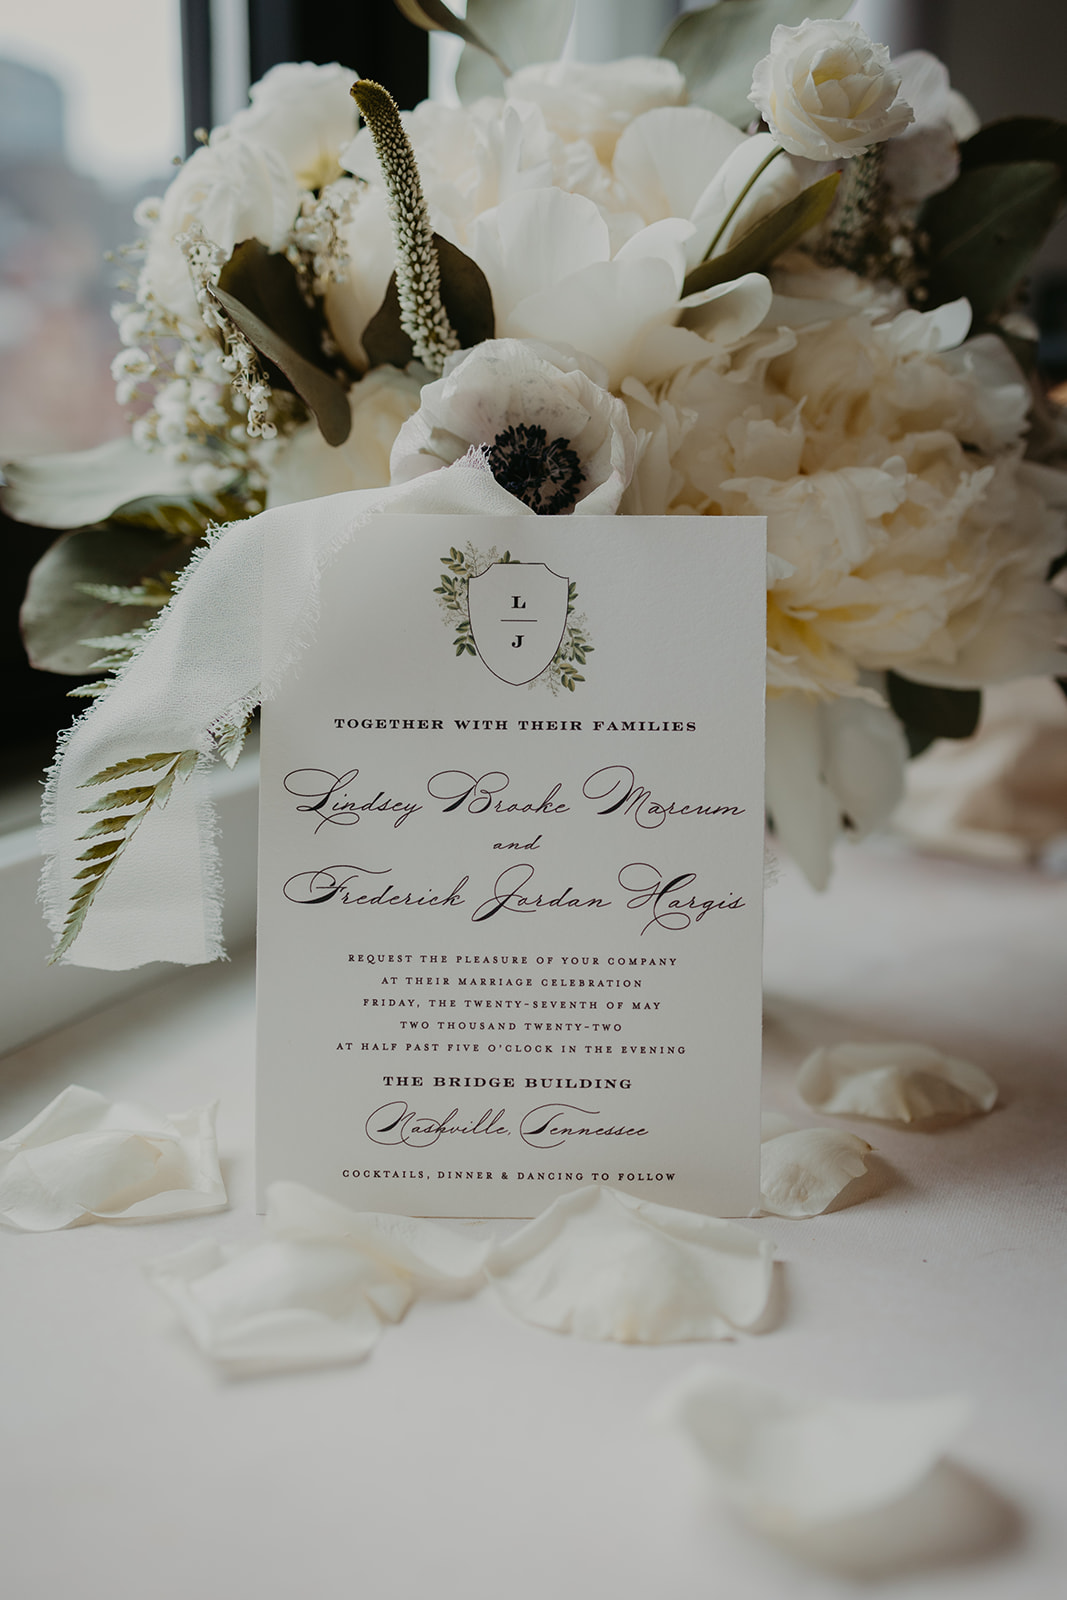 Wedding invitation on top of white flower petals, leaning against bouquet